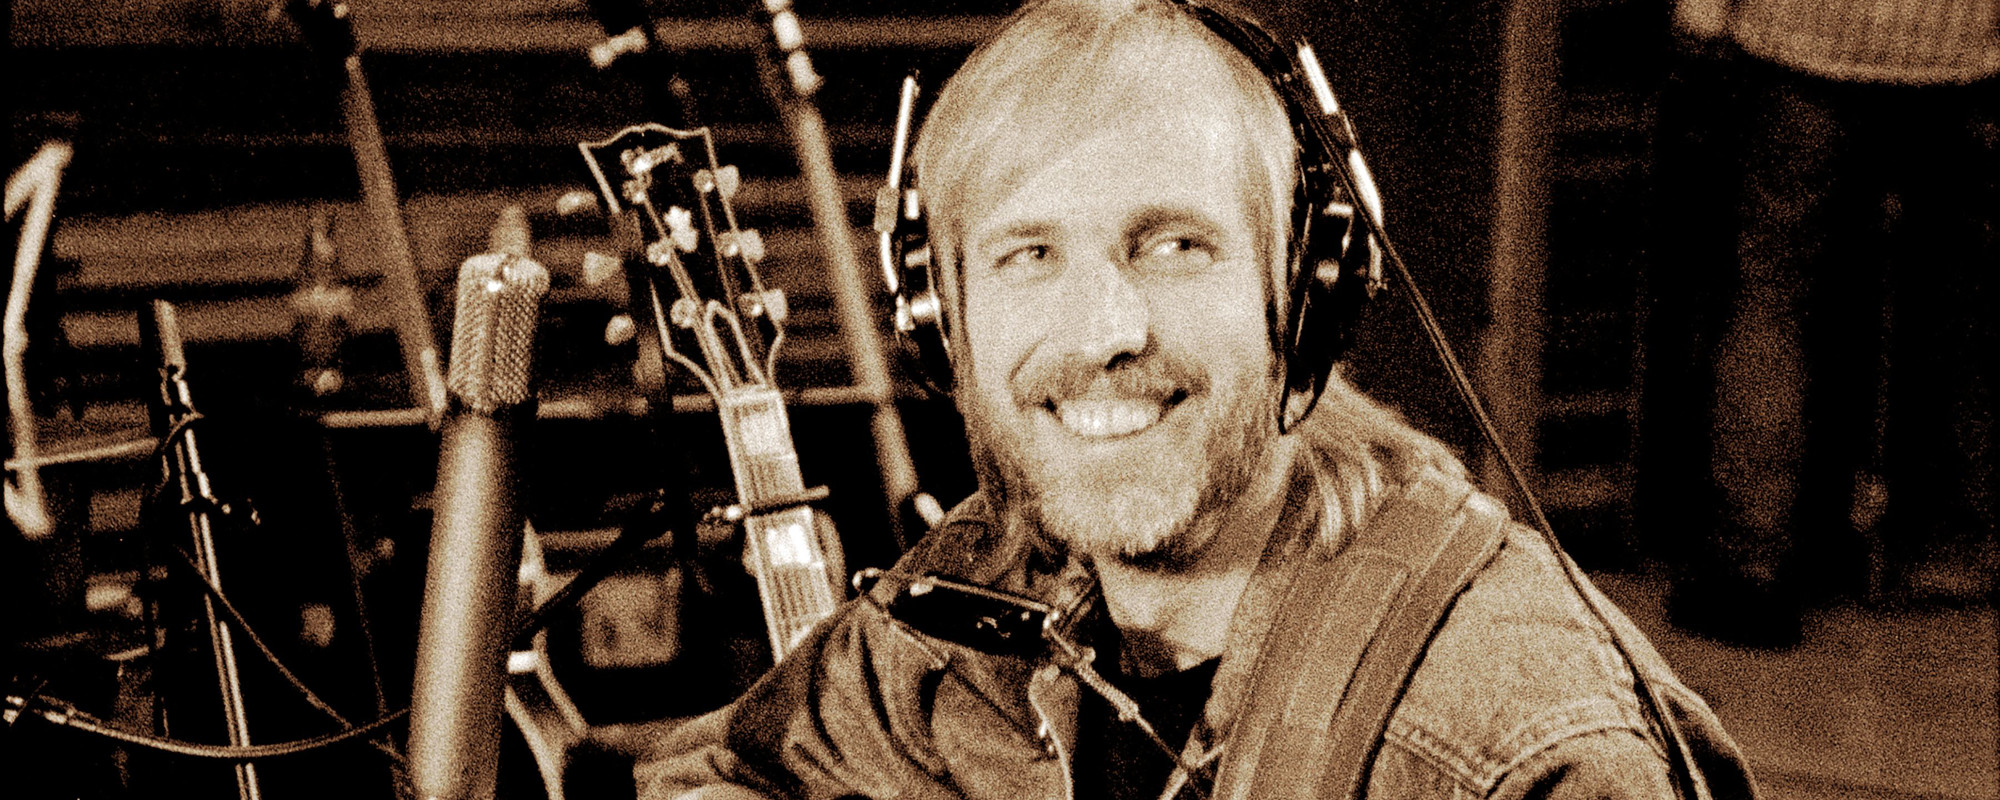 Wildflowers and Wonder: Exploring the Songwriting Legacy of Tom Petty